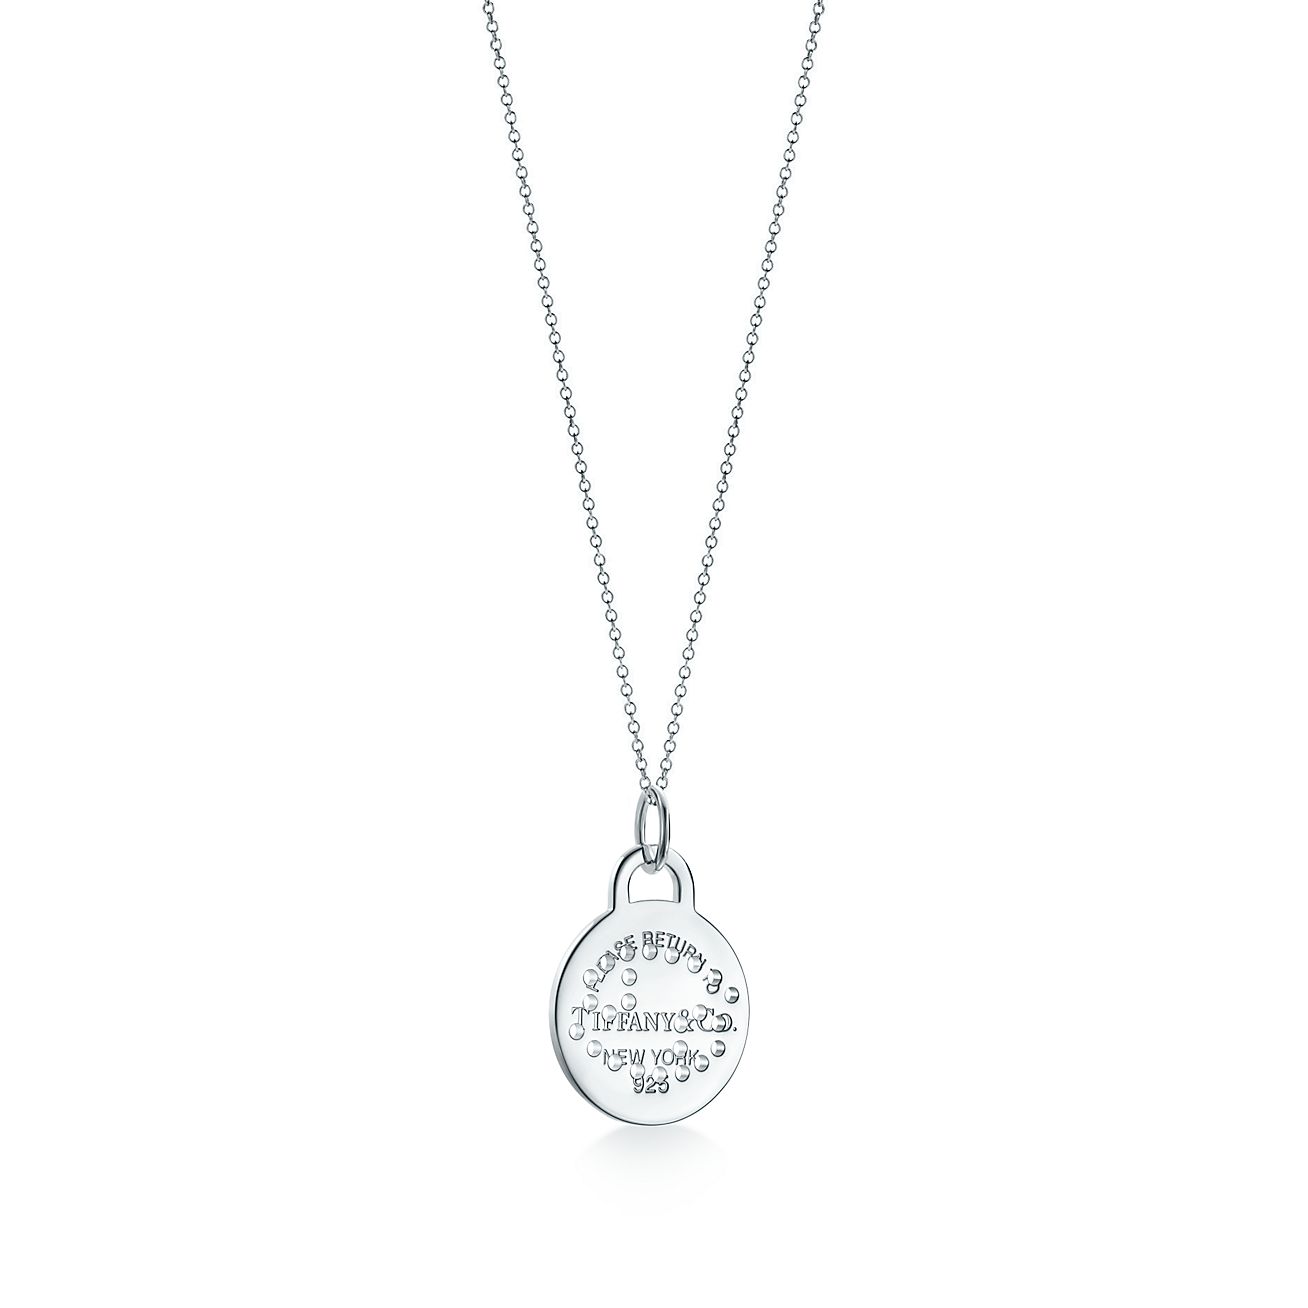 tiffany round tag necklace